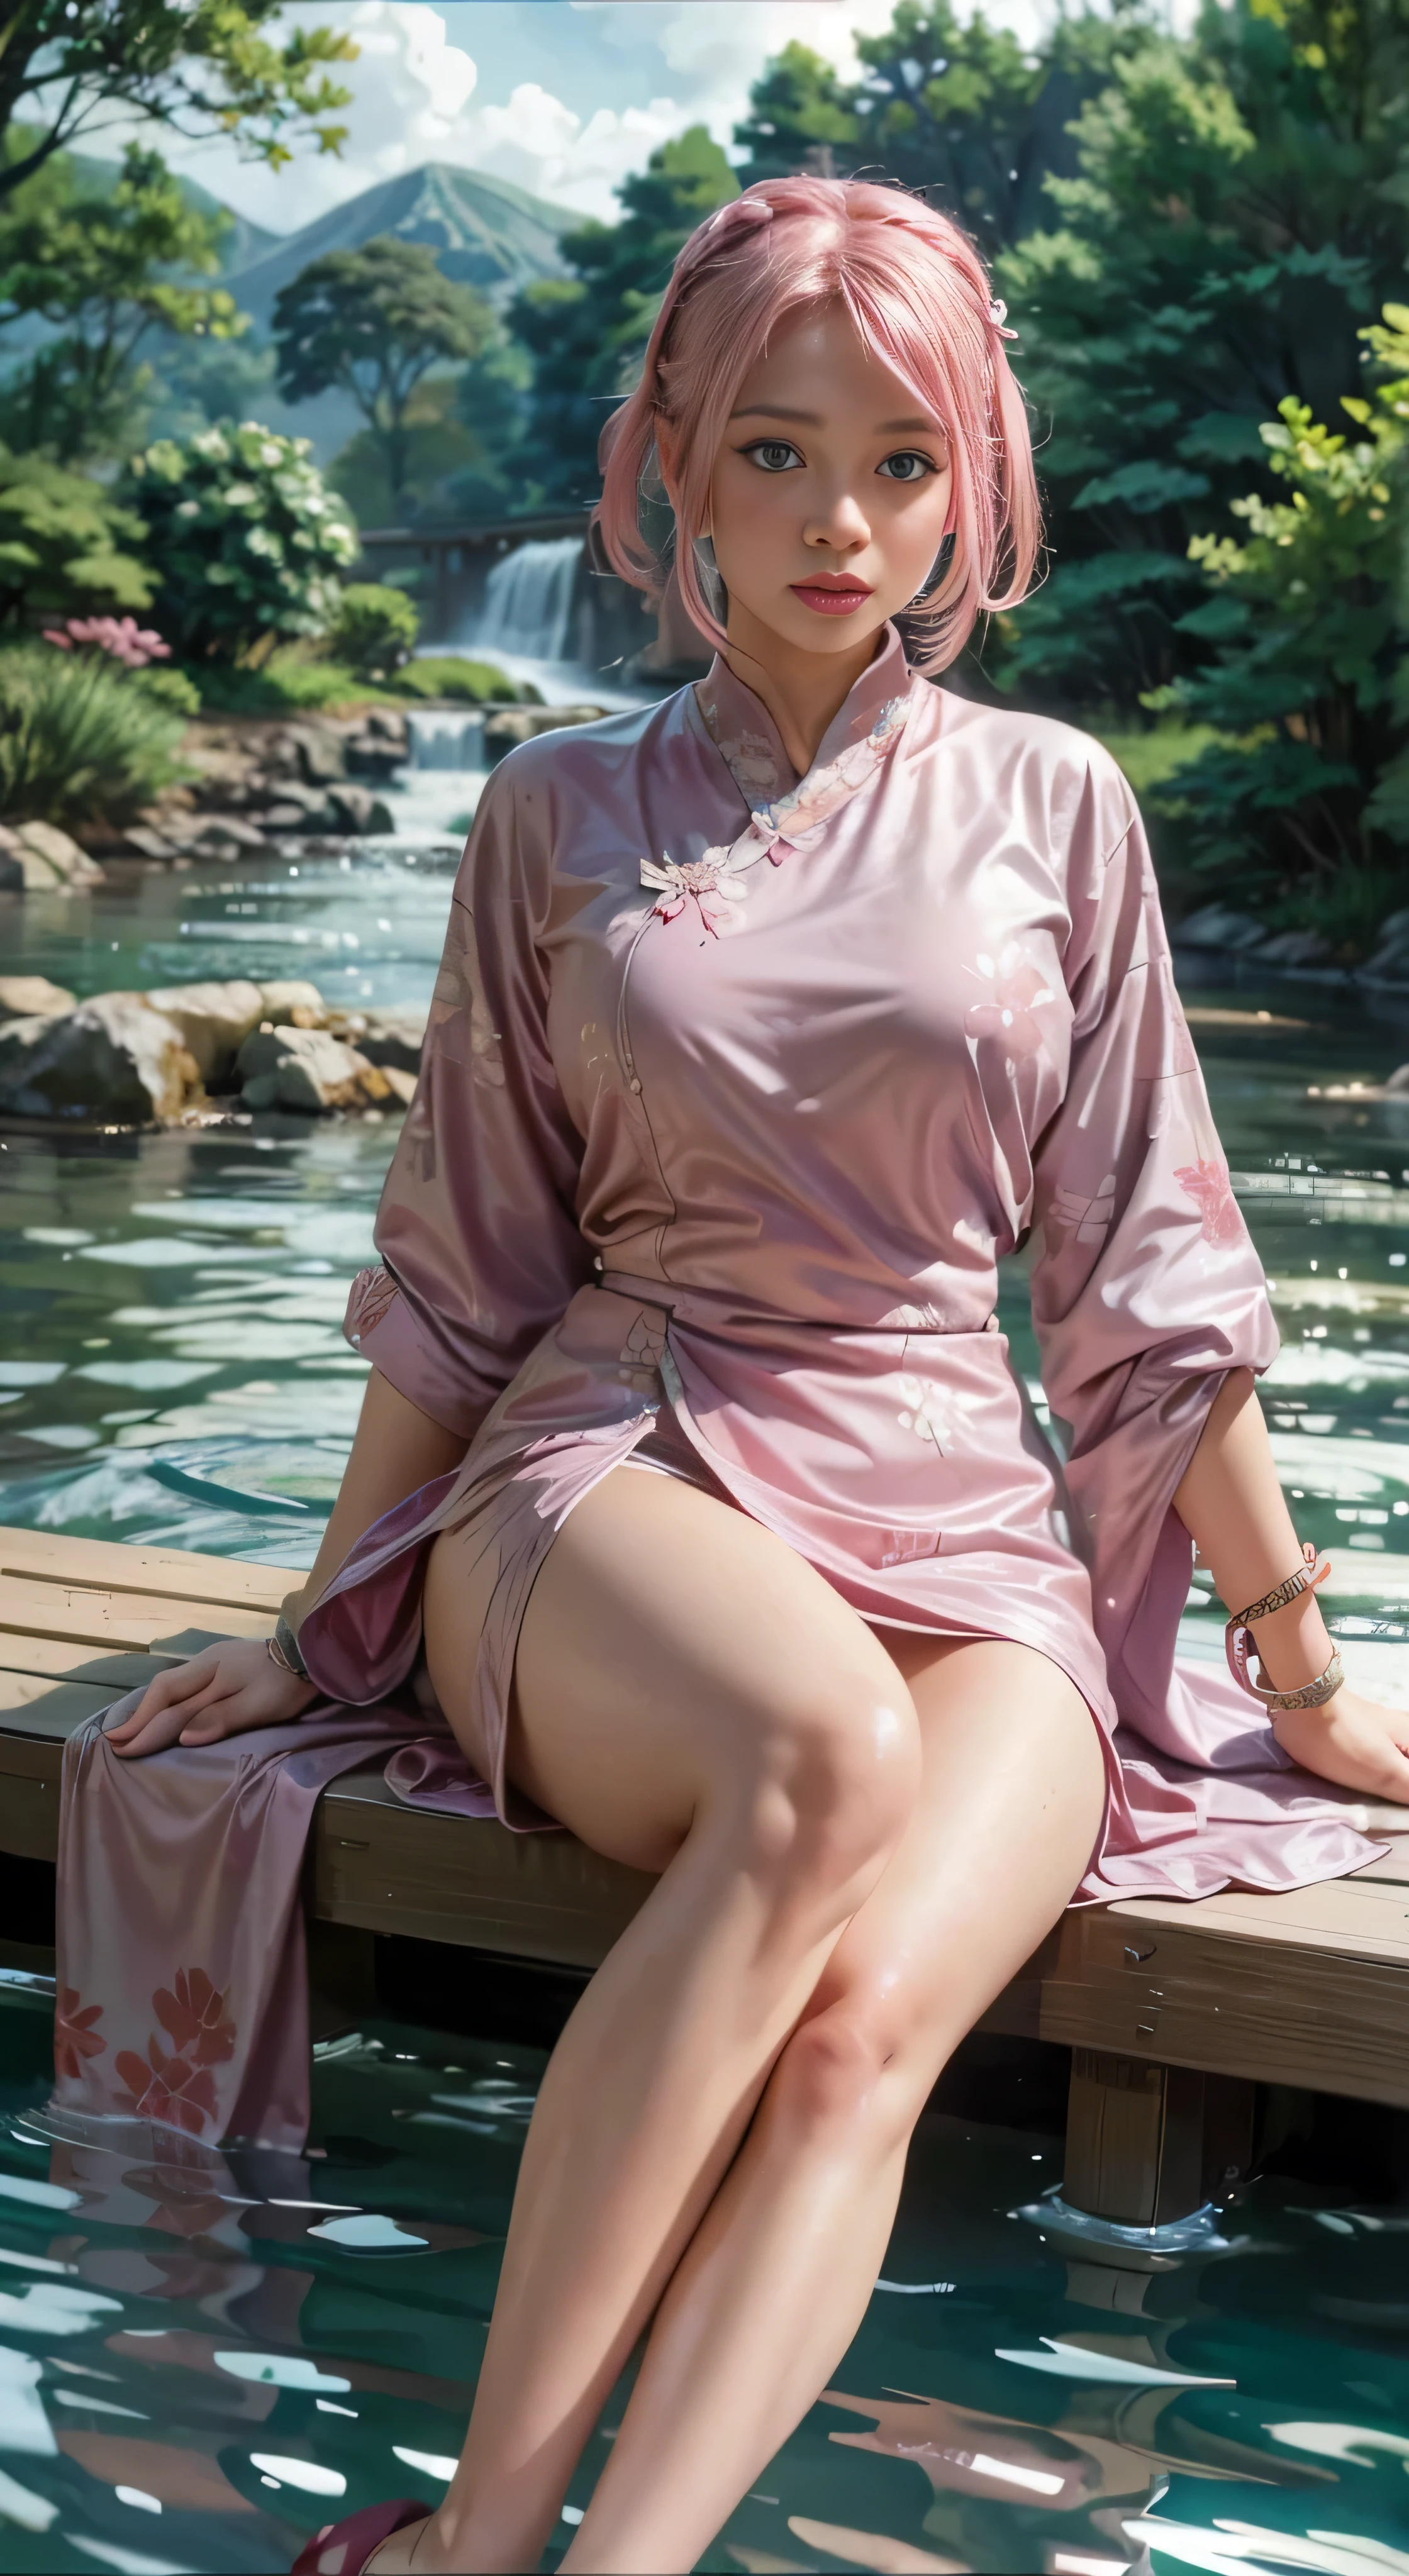 Sitting on a bridge full of river lanterns, feet playing in the water, the art depicts a charming woman dressed in a sakura flowing, silky traditional oriental dress, pink, decorated with intricate patterns and bright colors. Her dress drapes elegantly over her curvy figure, accentuating her seductive silhouette. She sits gracefully by the tranquil lotus lake, her feet playing in the water, bathed in the soft glow of the moonlight. The scene exudes an ethereal and dreamy atmosphere, with a touch of mystery and sexiness. The graphic style blends watercolor and digital illustration techniques to evoke a refined beauty and charm. The lights are filled with soft moonlight, casting soft highlights and shadows on her charming features. Bare thighs, big breasts, three-dimensional facial features, sitting, upturned legs, side braids , beautiful girl long pink hair and green eyes looks like sakura haruno from naruto